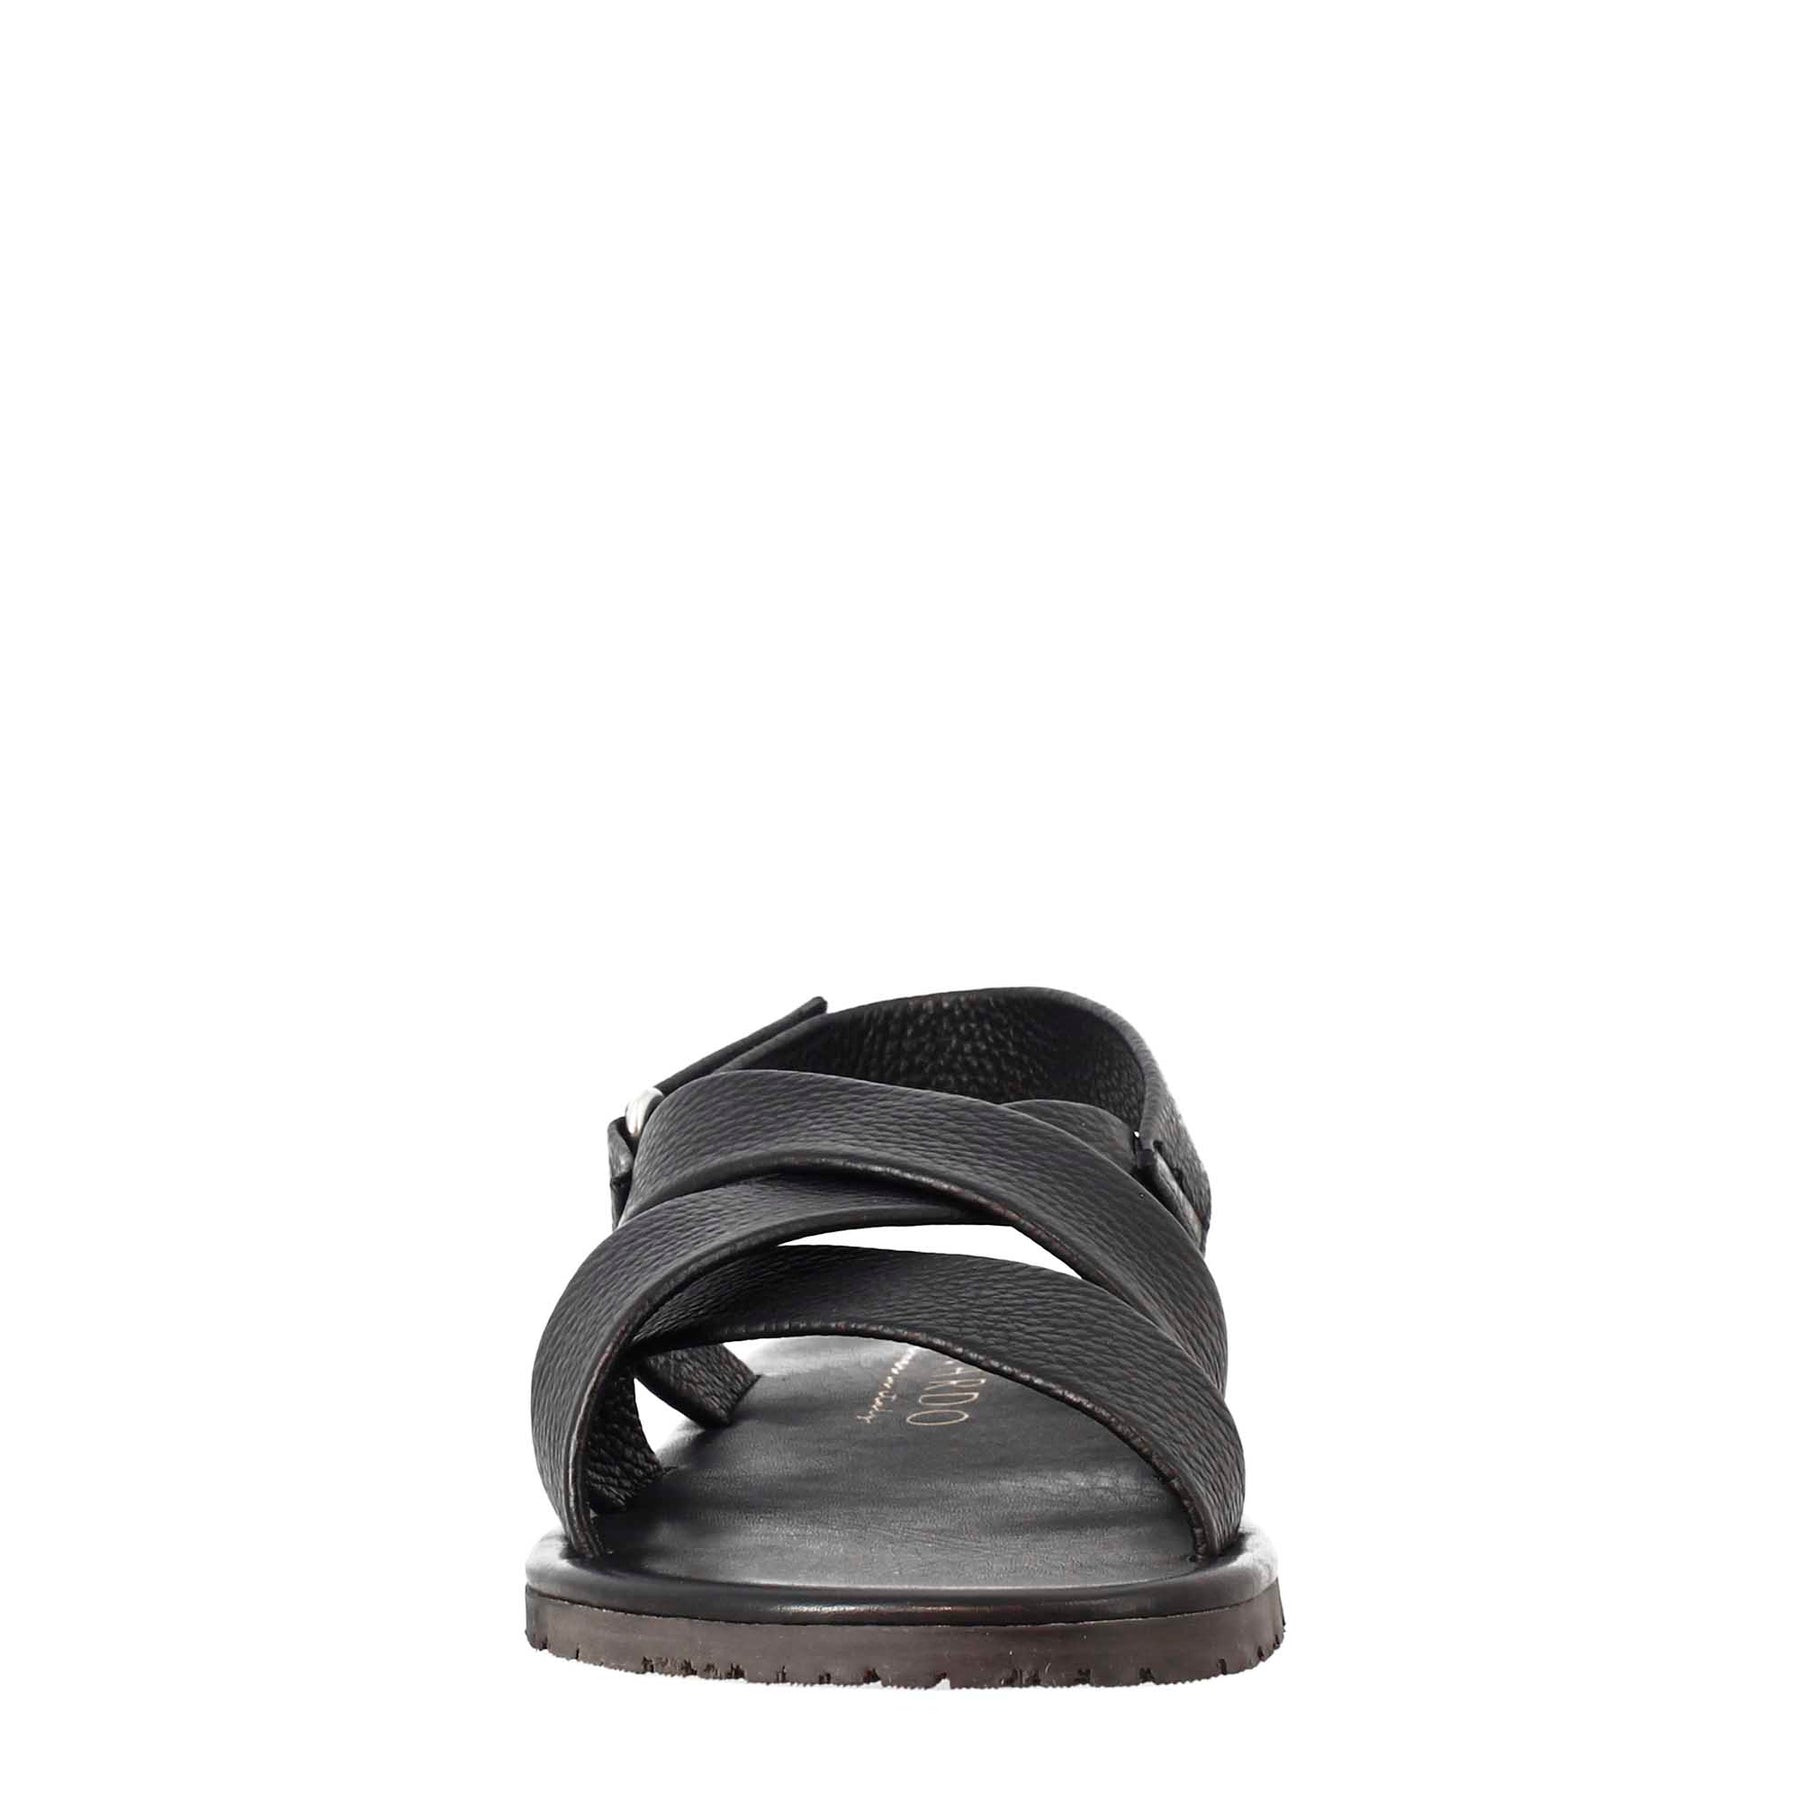 Handmade men's sandals in black leather with velcro closure